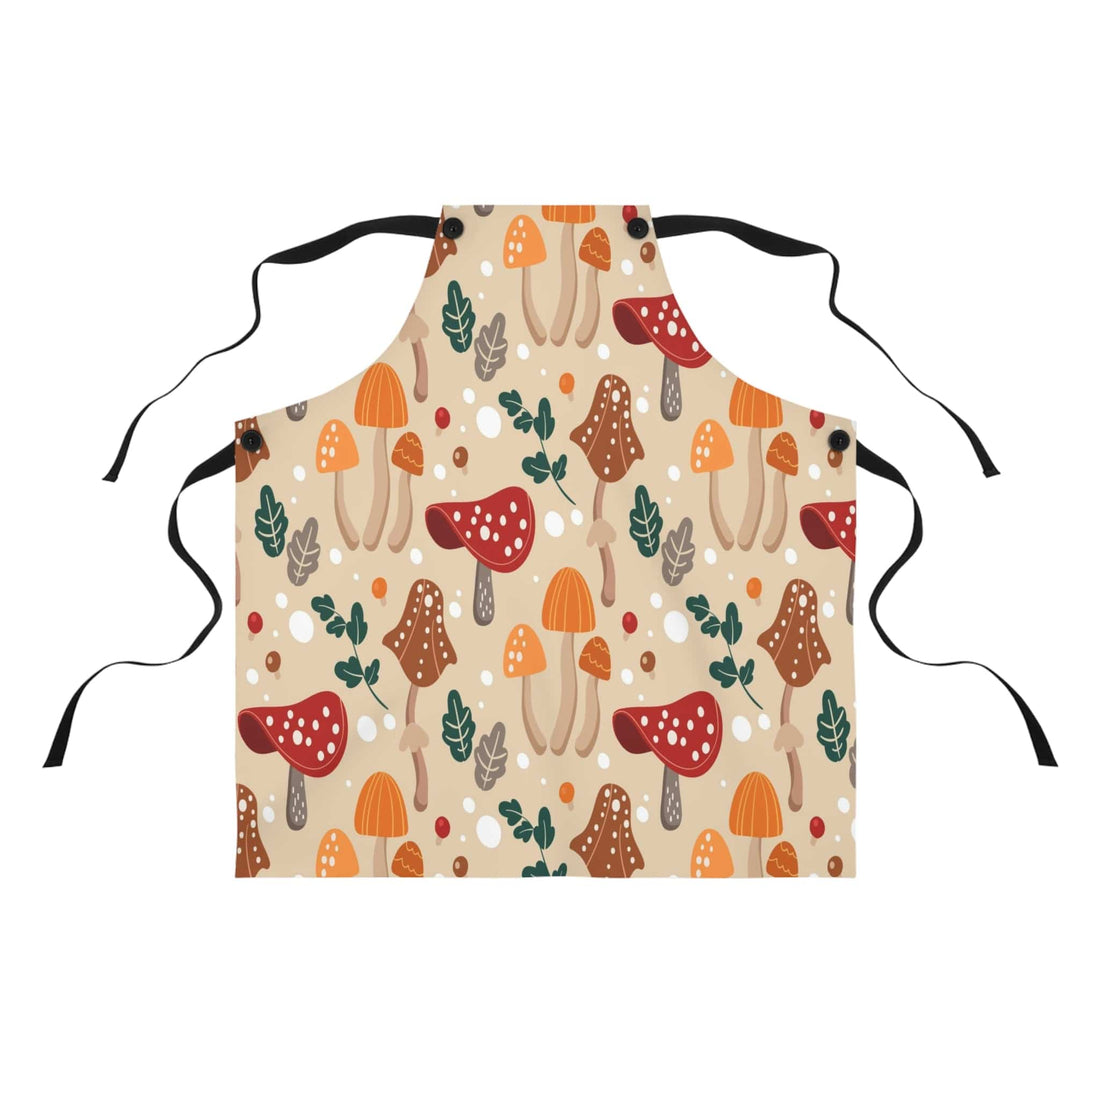 Kate McEnroe New York Cottagecore Mushroom Apron, Whimsical Mushroom Toadstool Floral Chef Apron, Mothers Day Gift, Chef Gift, Kitchen Gifts Aprons One Size 26822024541472216118